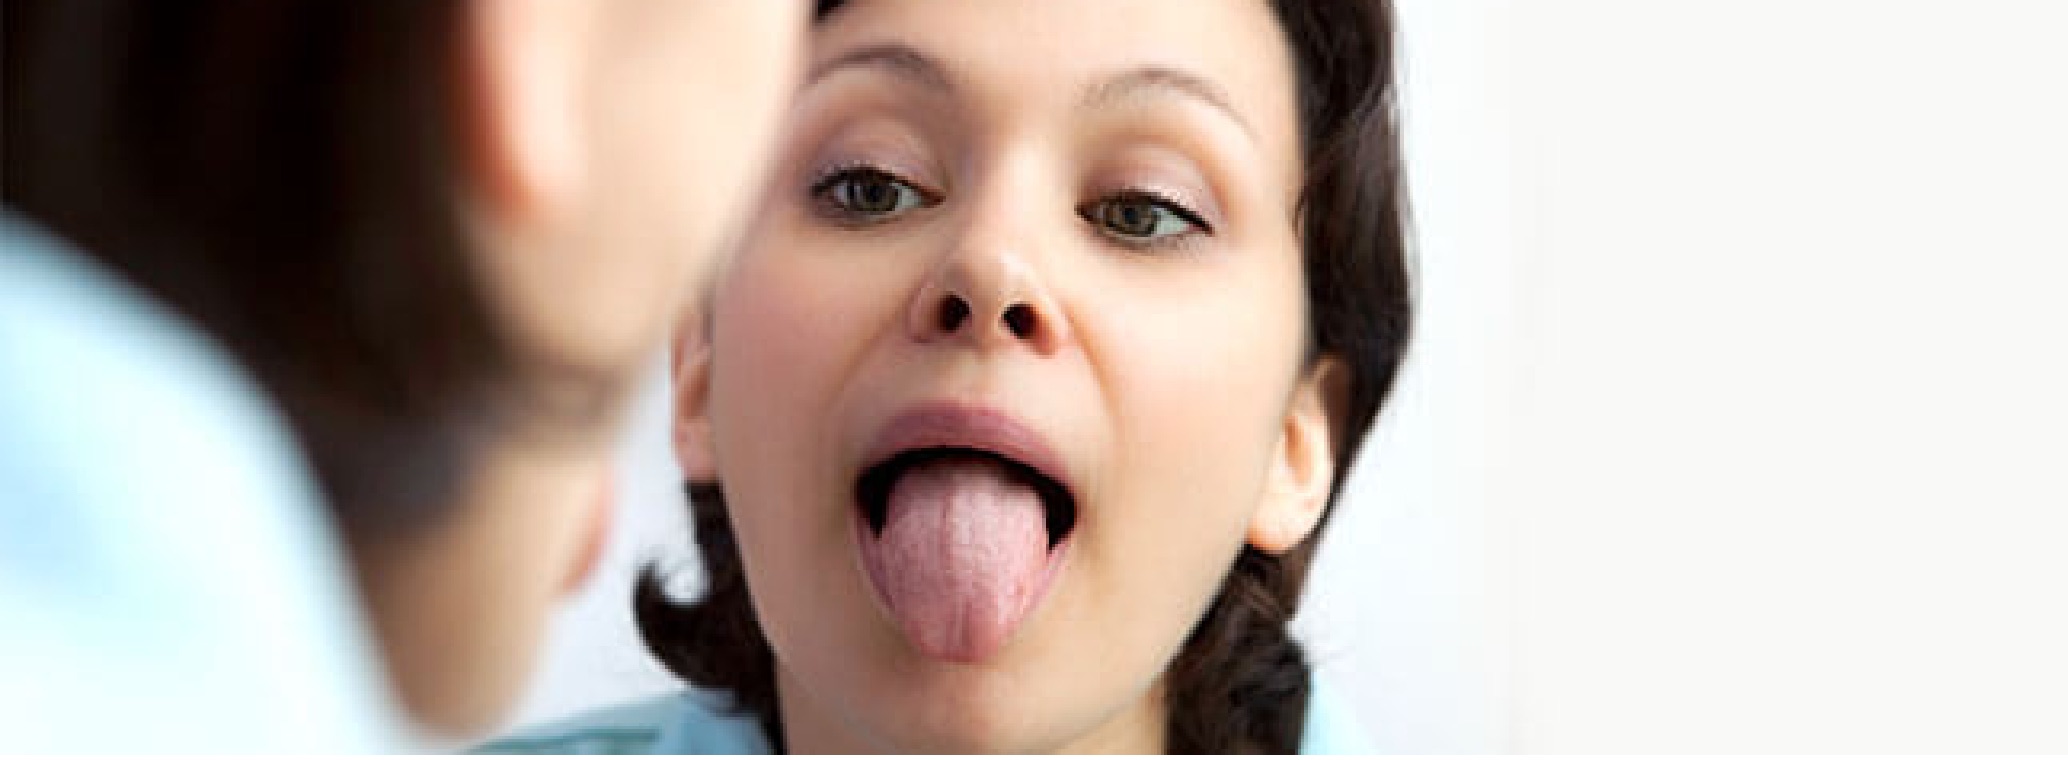  Tongue Bumps-Enlarged Papillae and Other Problems